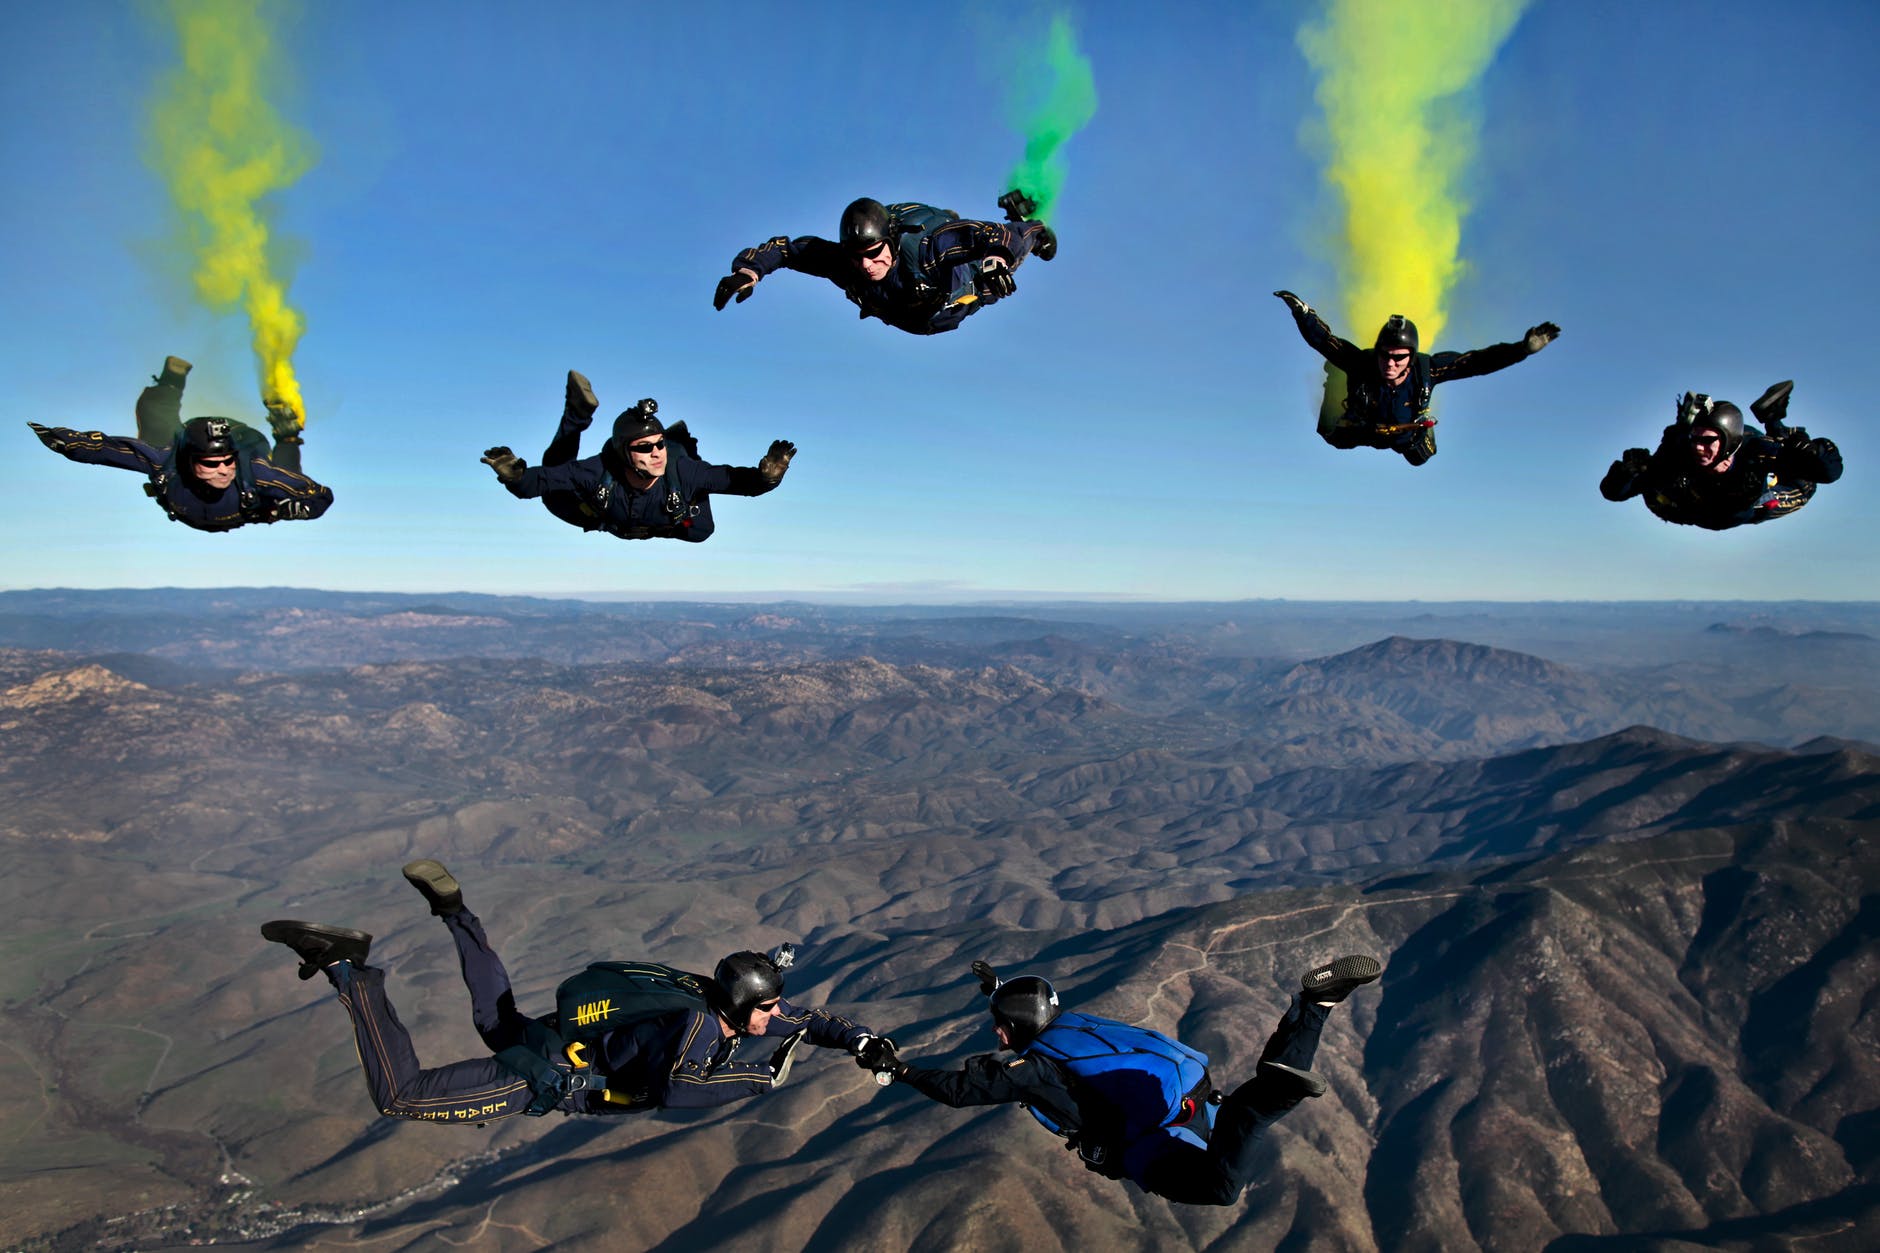 Would You Skydive Without A Parachute?